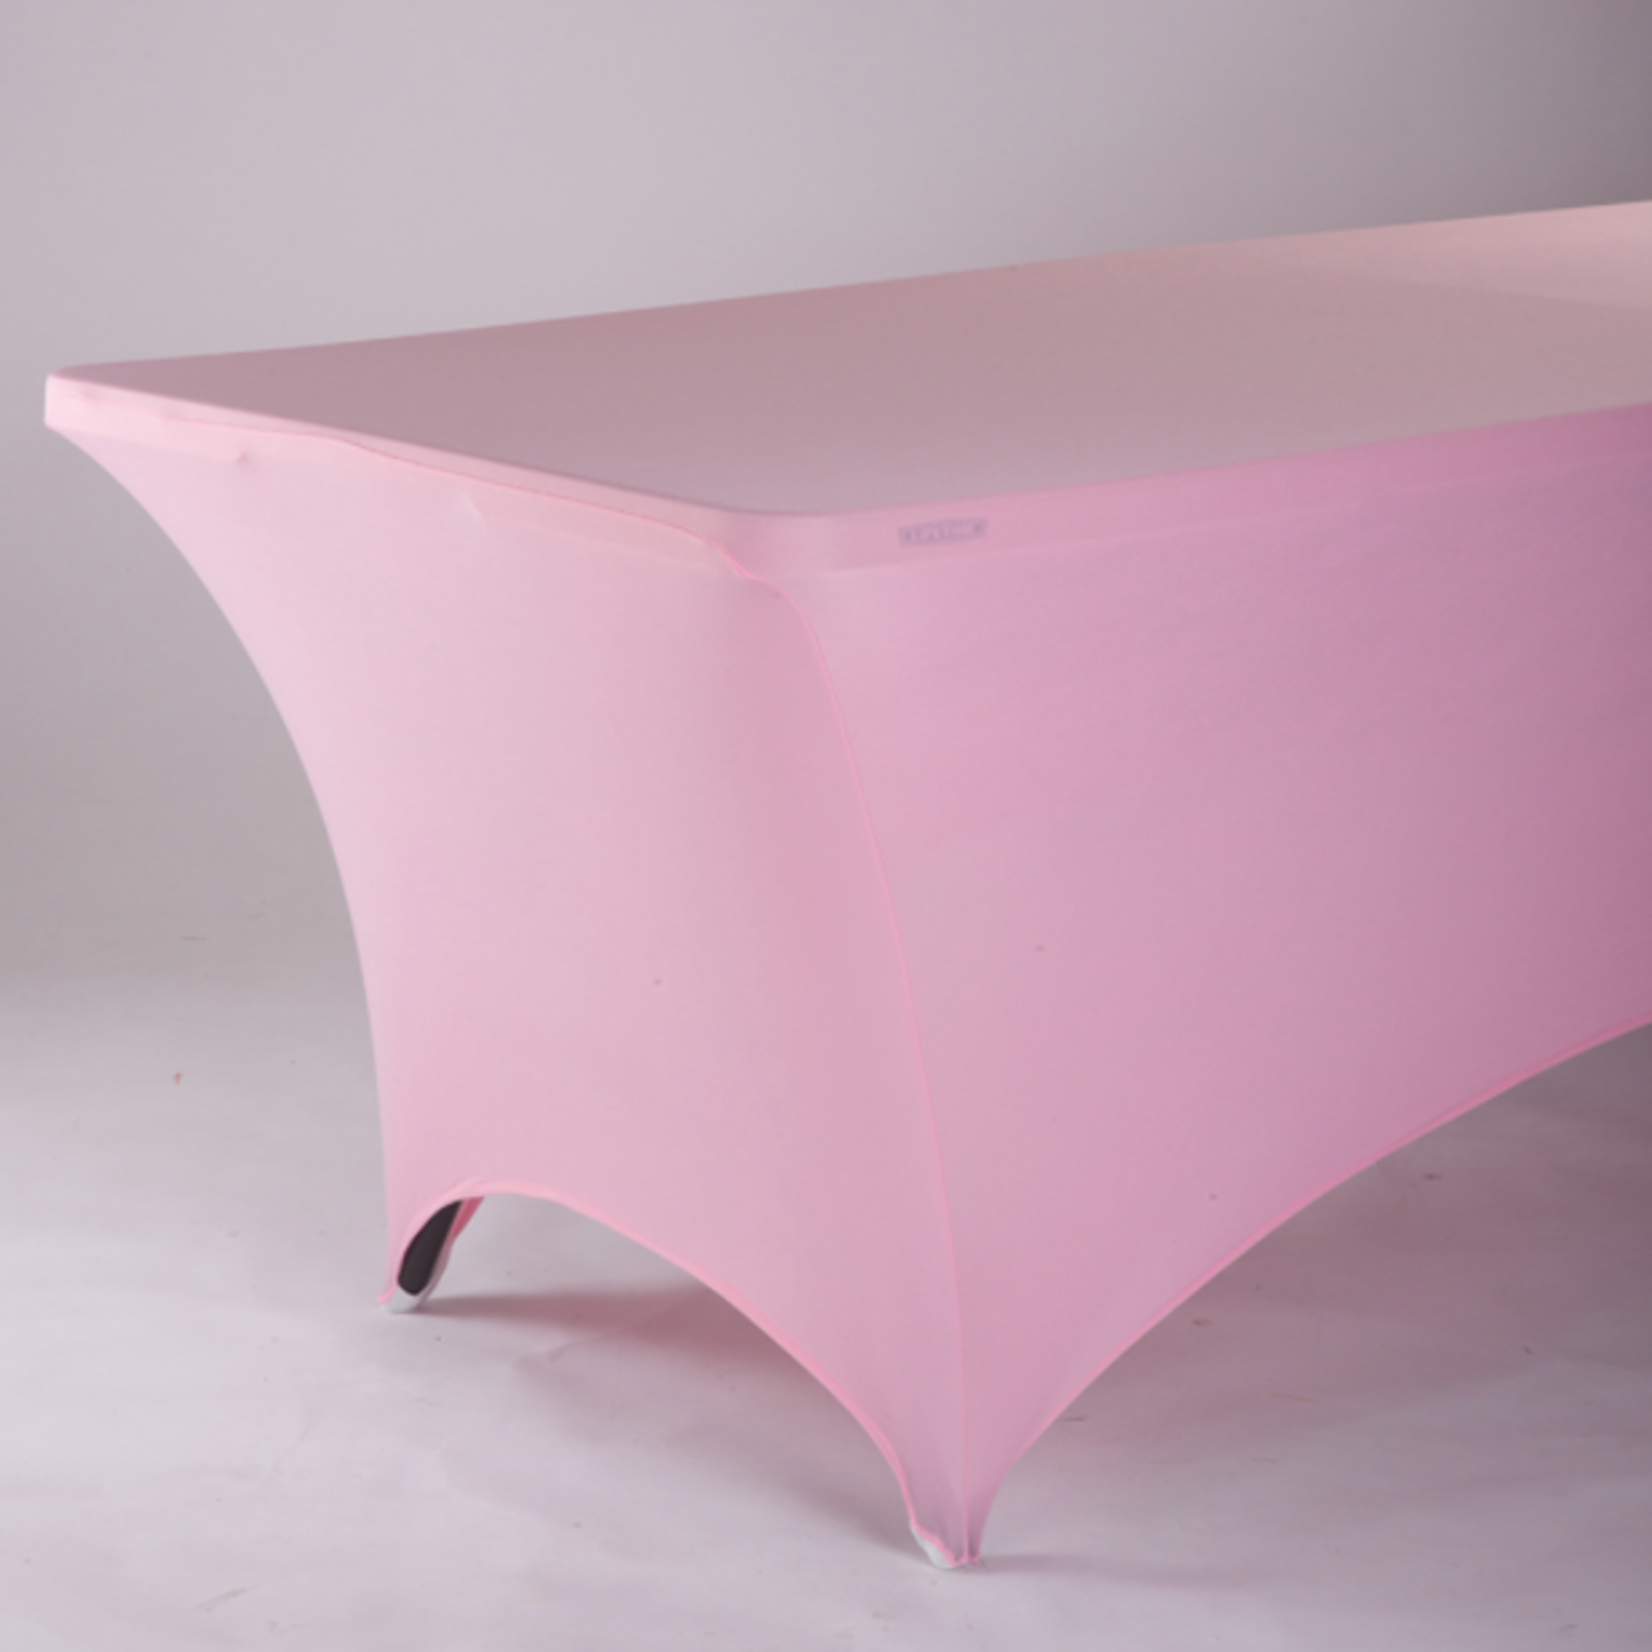 6 FY PINK SPANDEX RECTANGLE TABLE COVER